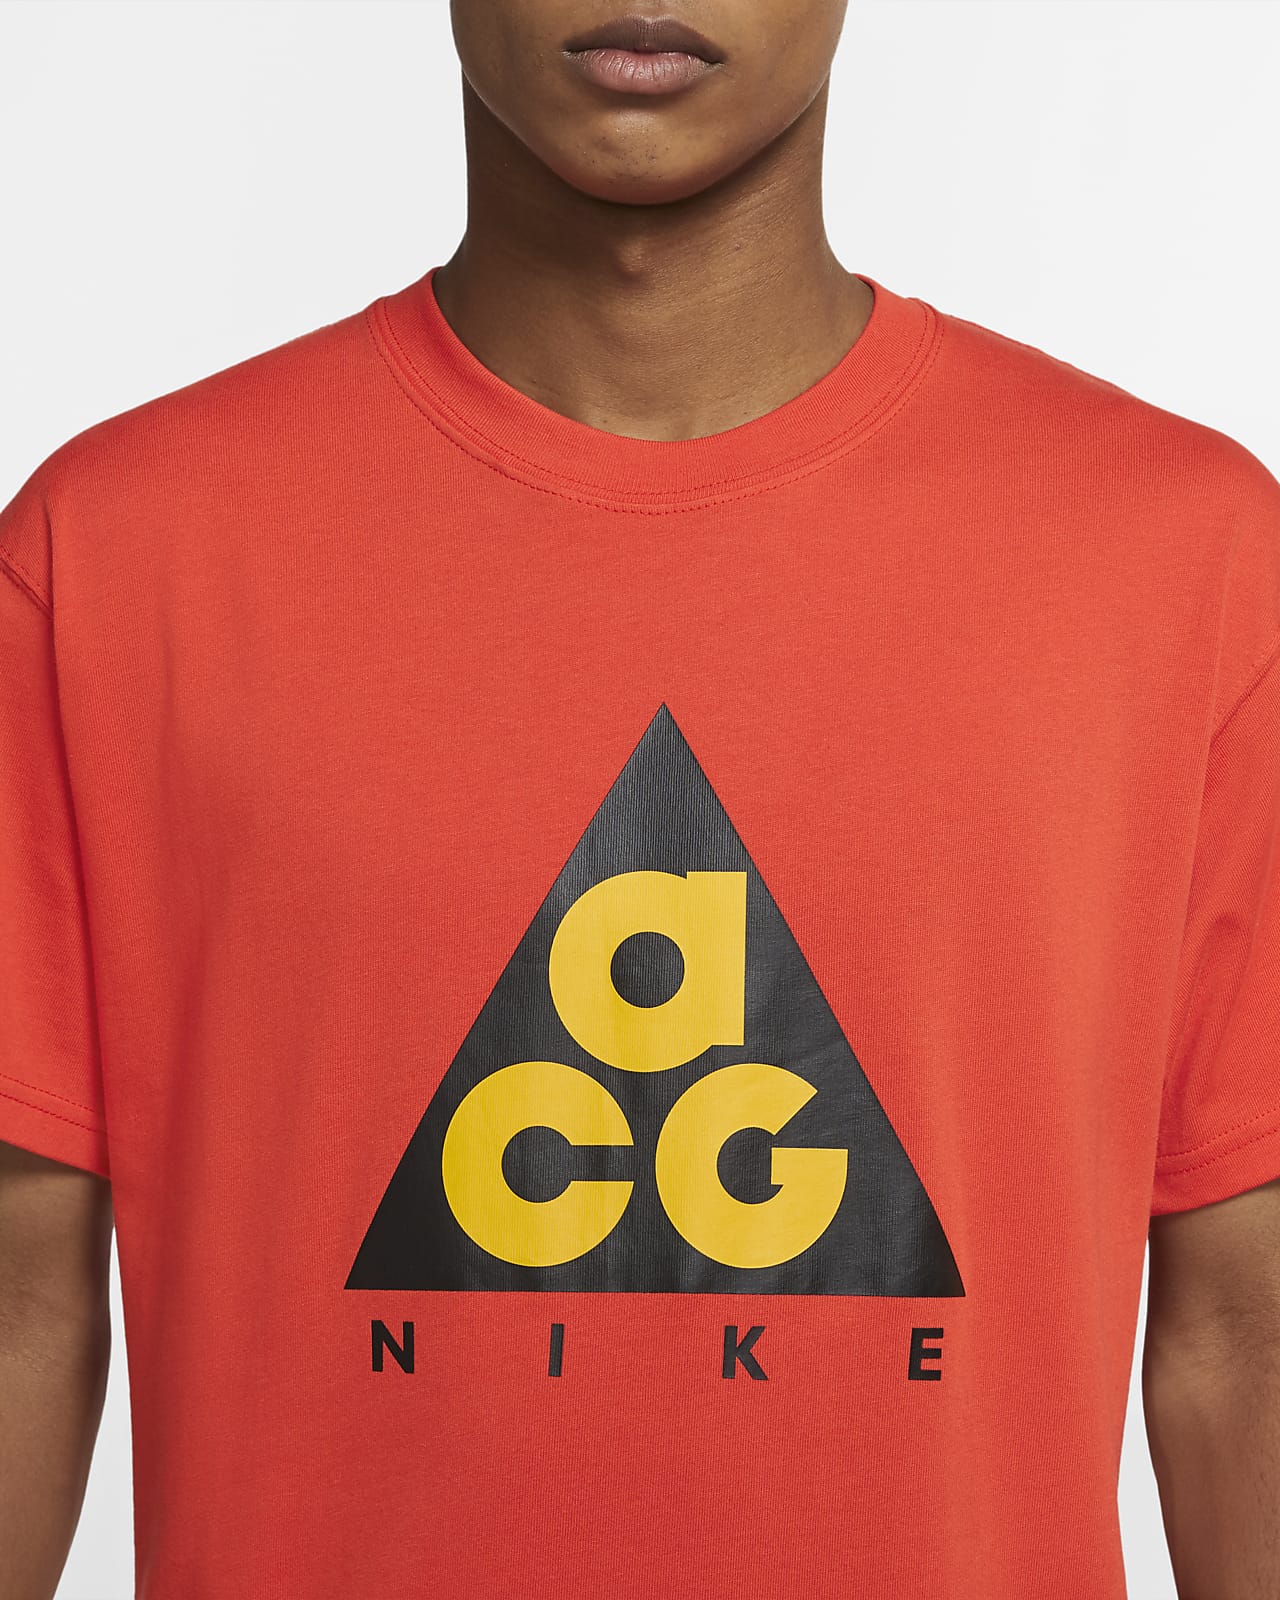 nike black and red t shirt